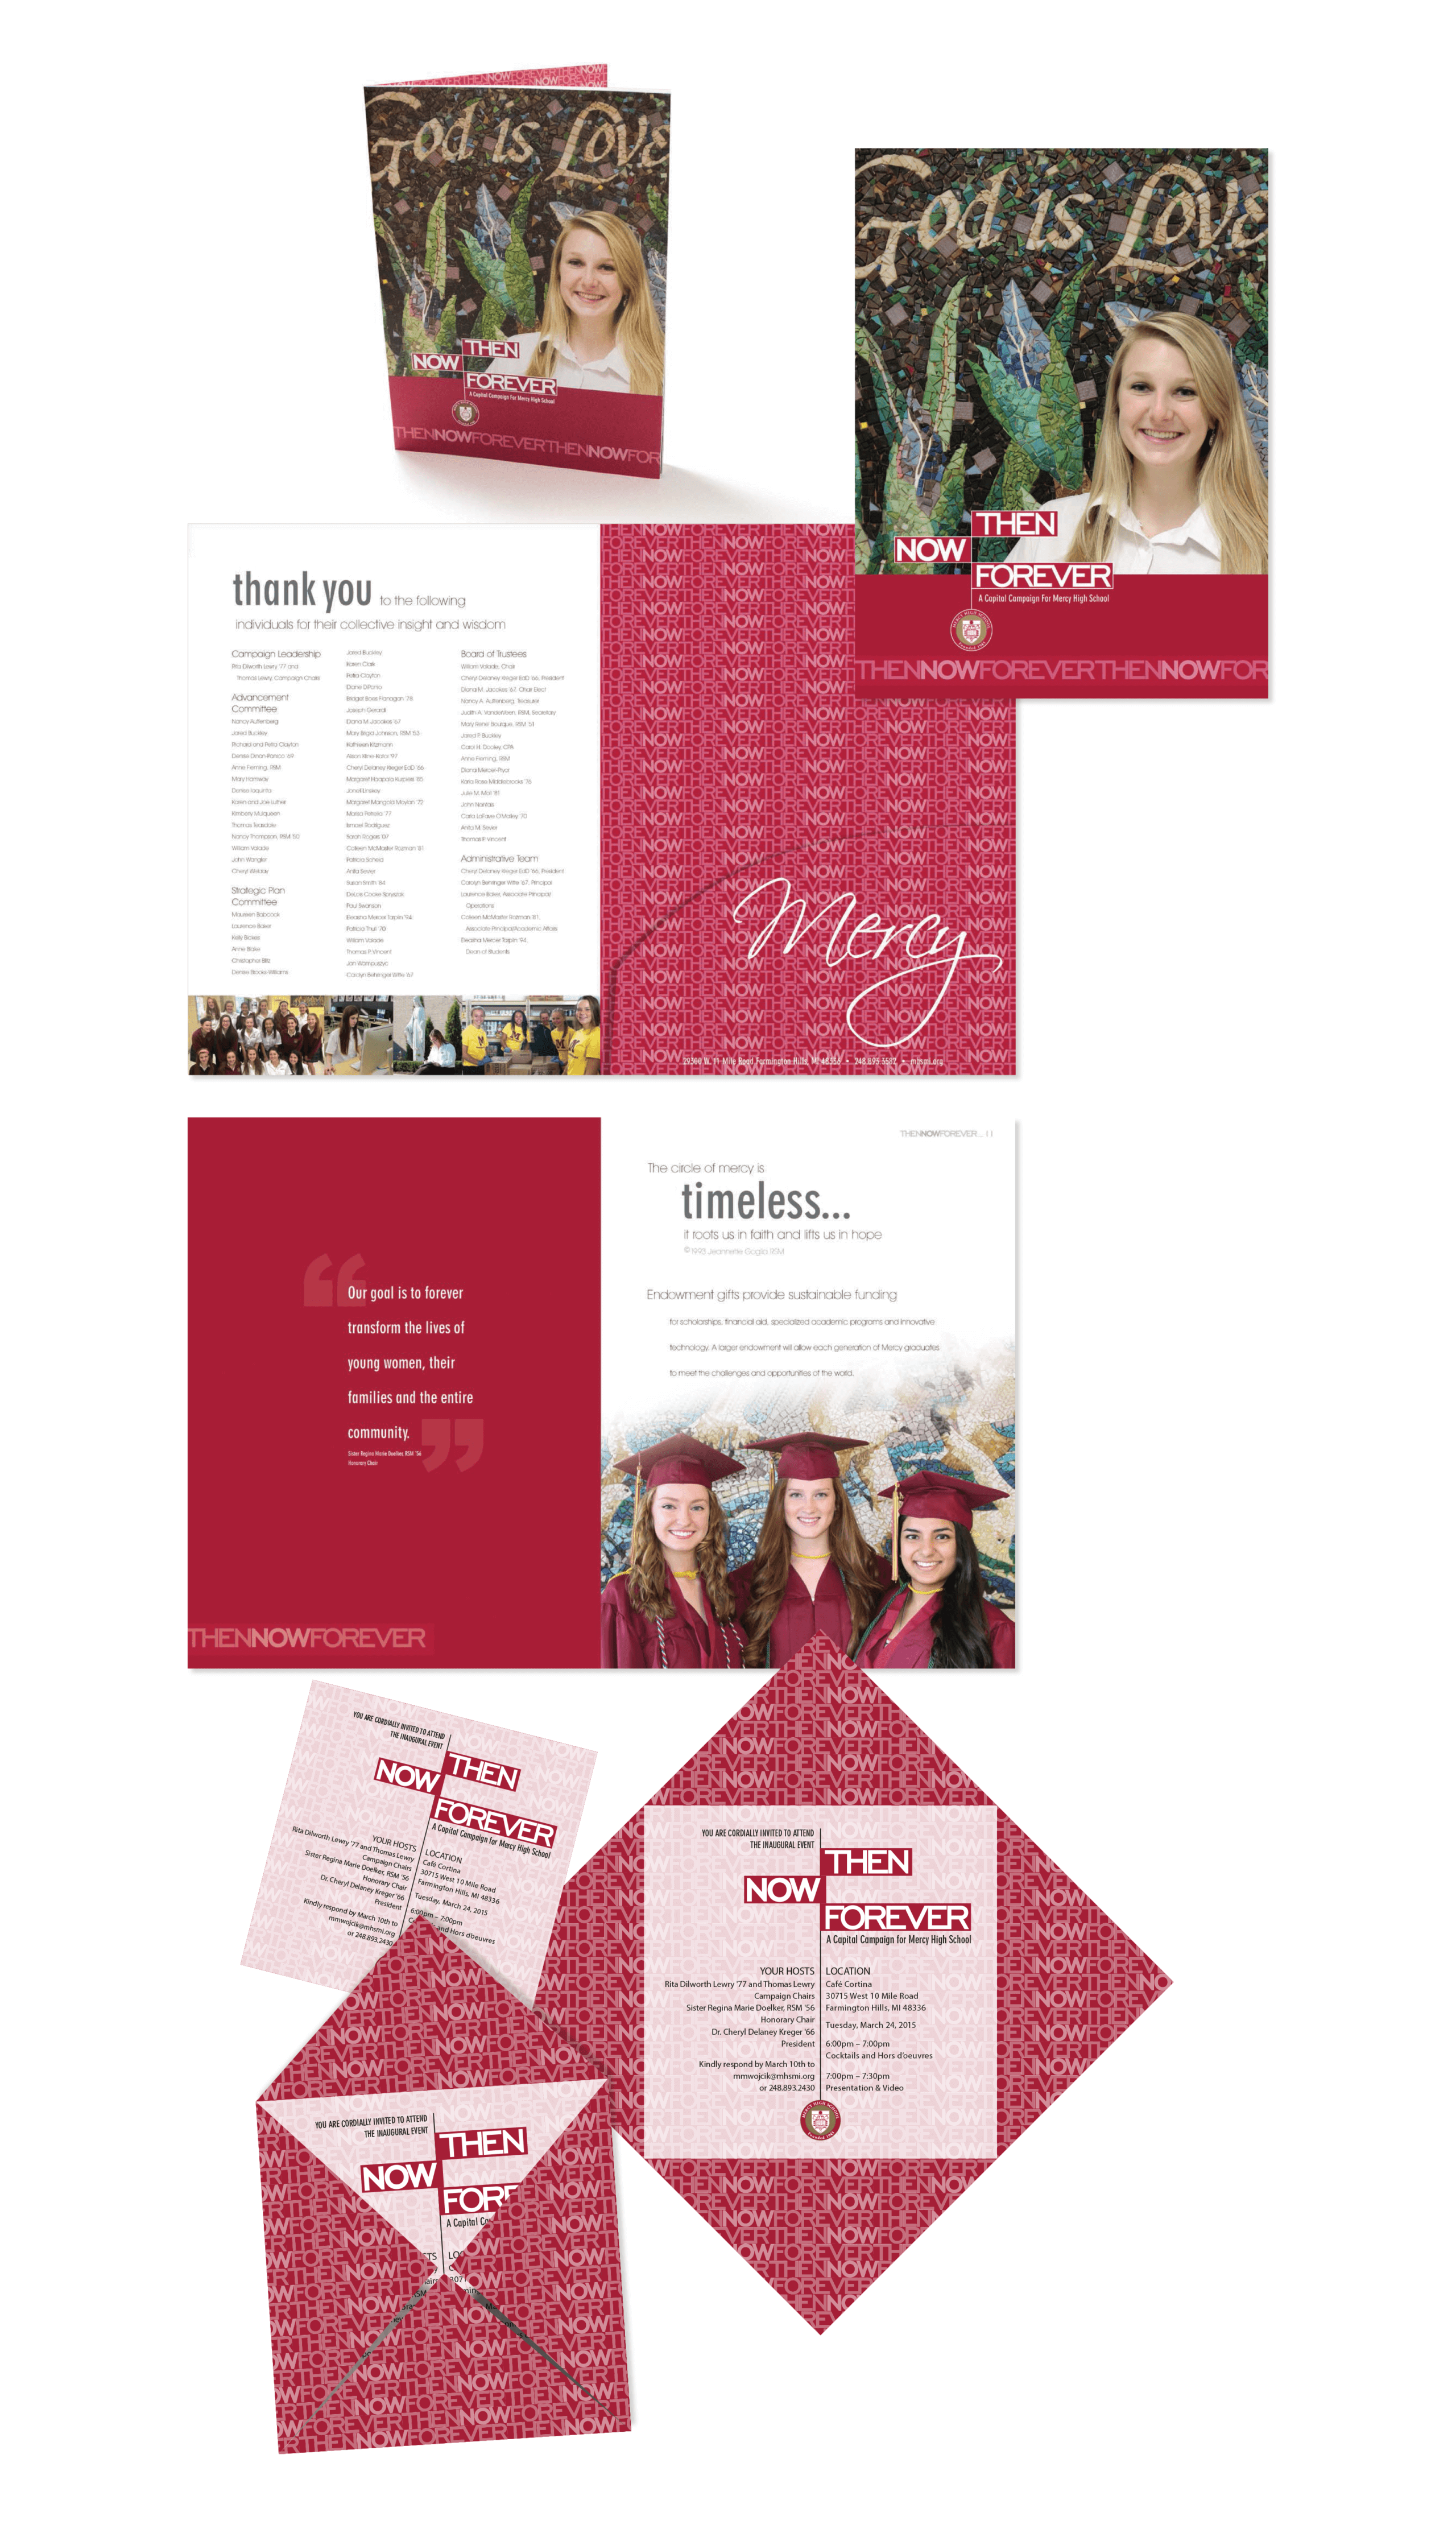 Invitation and fundraising events create campaign success with Anne Ink branding, marketing, and corporate identity expertise.